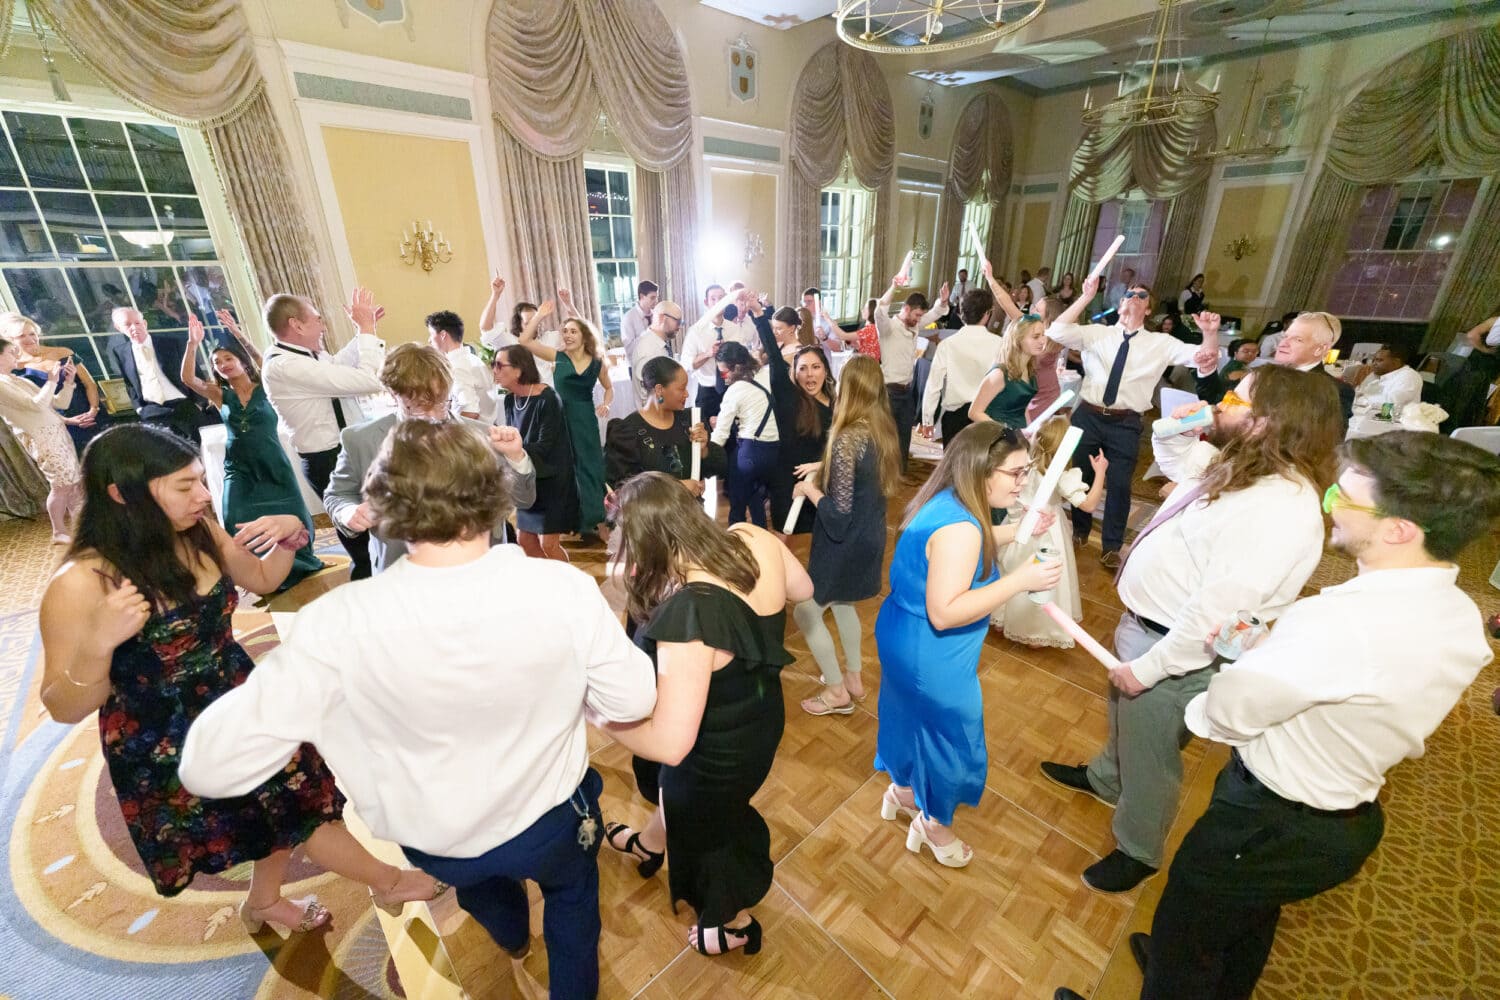 Fun with ultra wide lens on the dance floor - Francis Marion Charleston